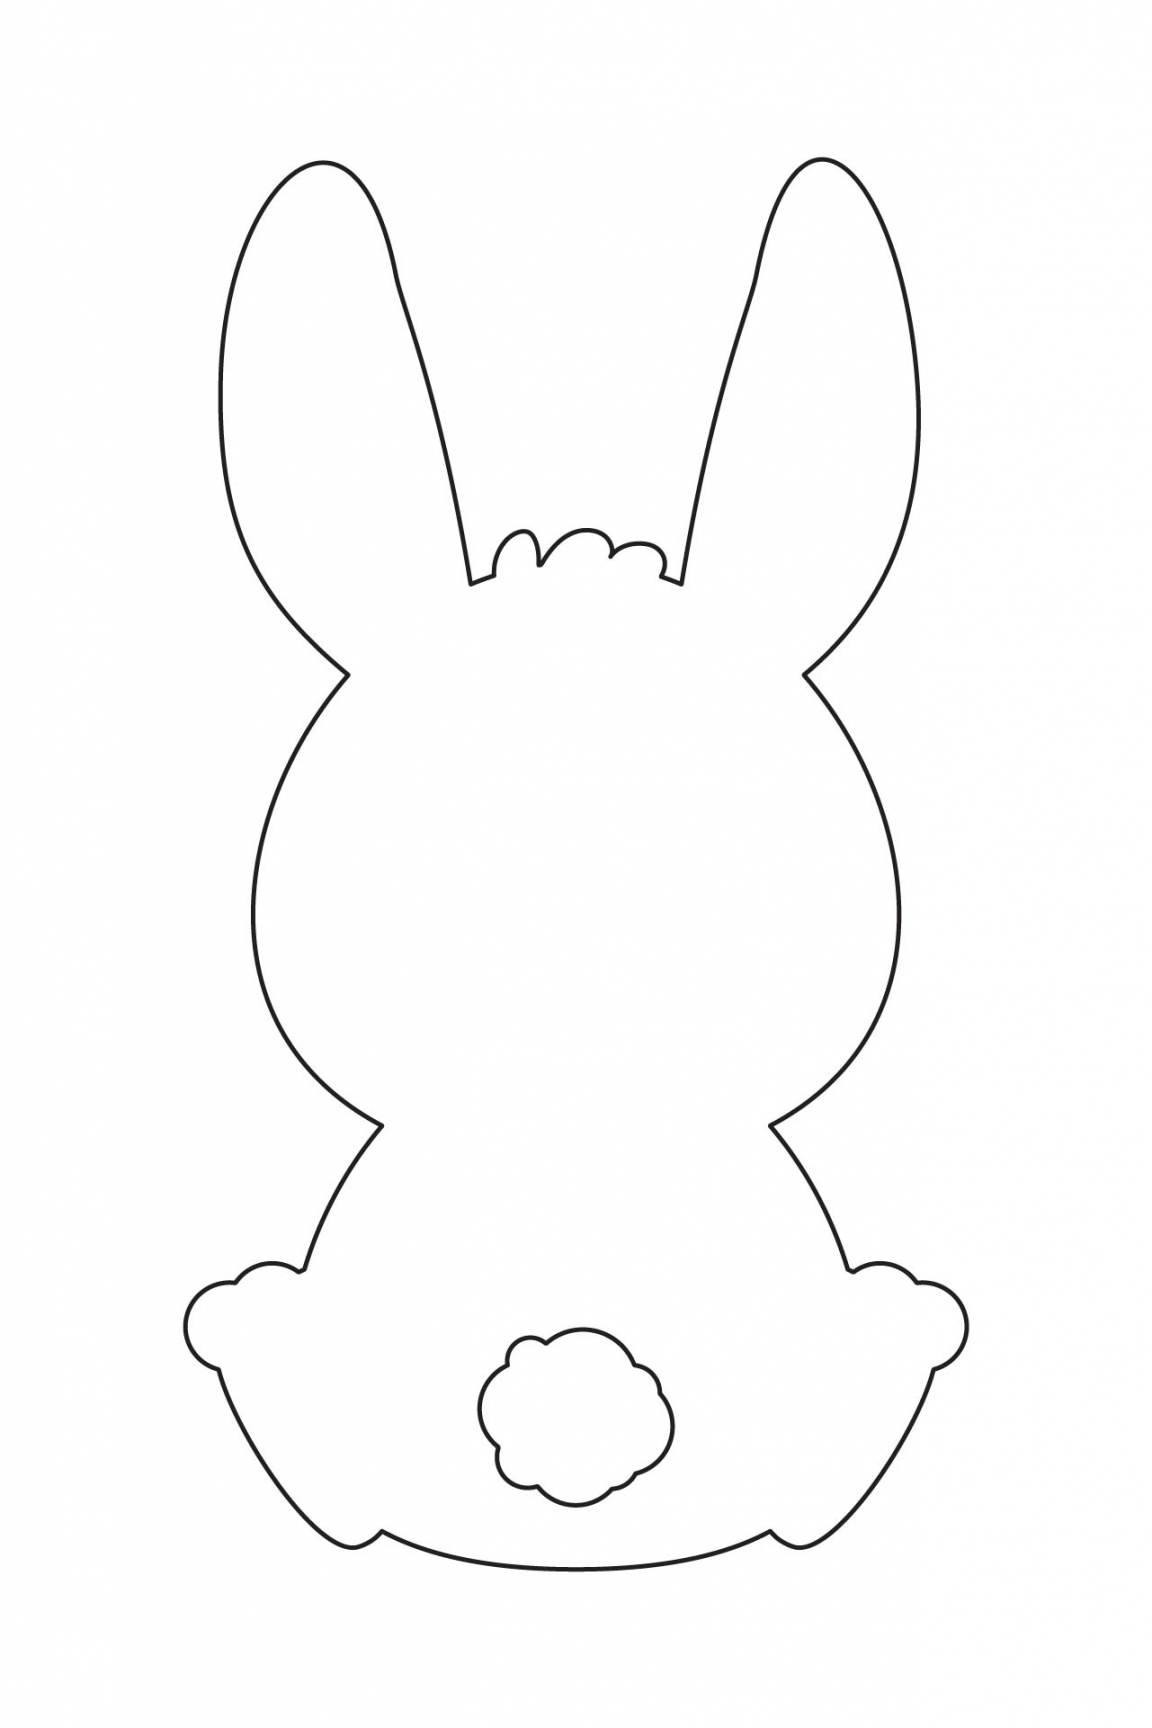 Best Free Printable Easter Bunny Stencil - printablee - Bunny Cut Out Template